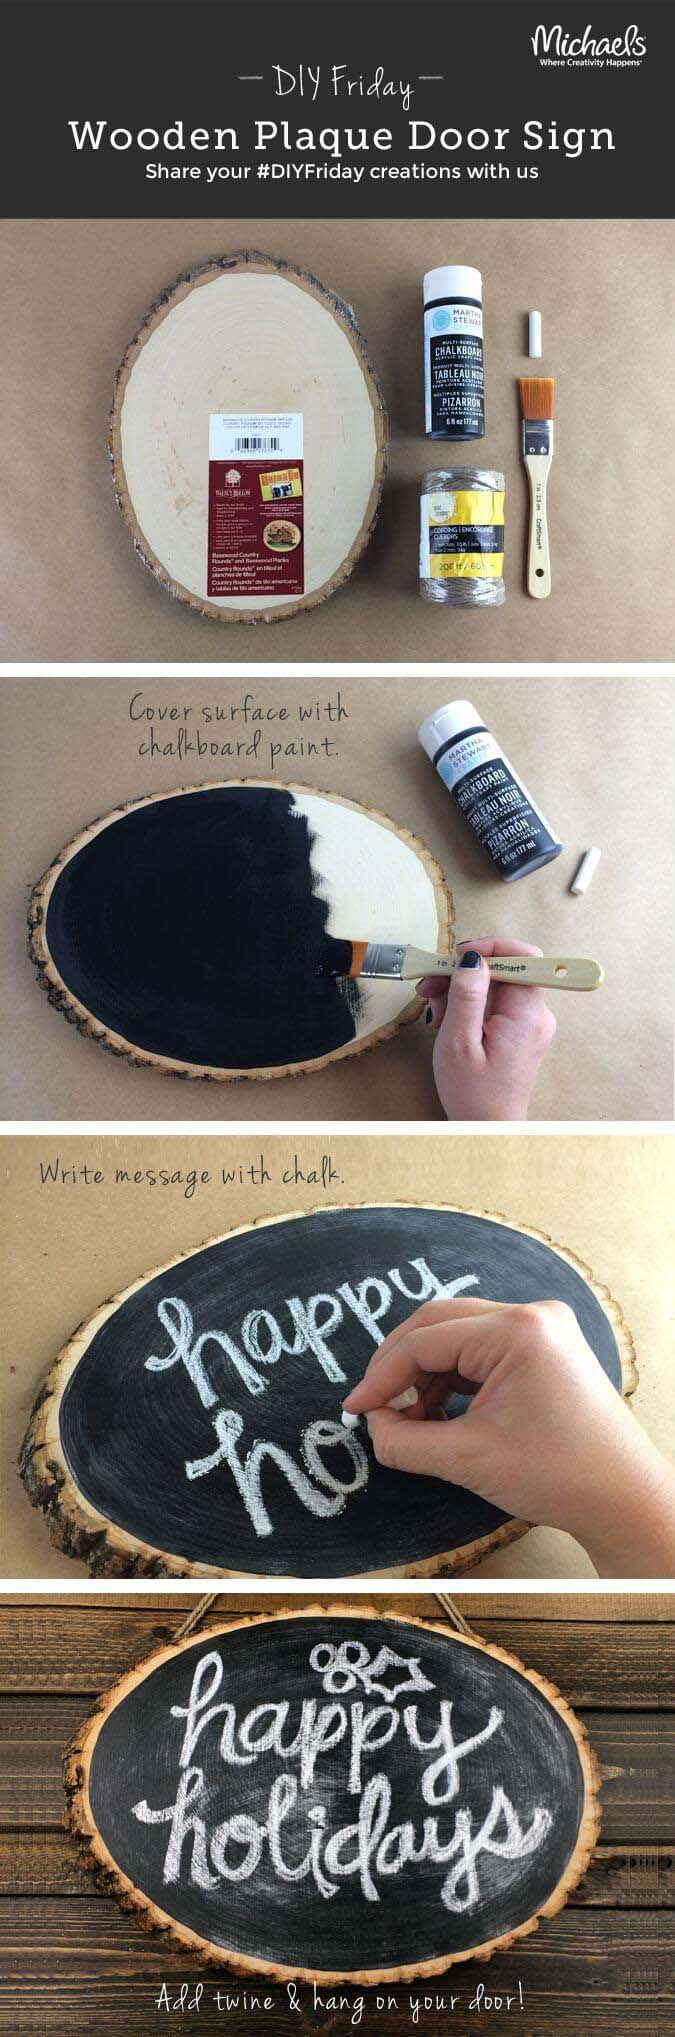 Spread a Cheery Message with a Chalkboard #Christmas #crafts #decorations #decorhomeideas